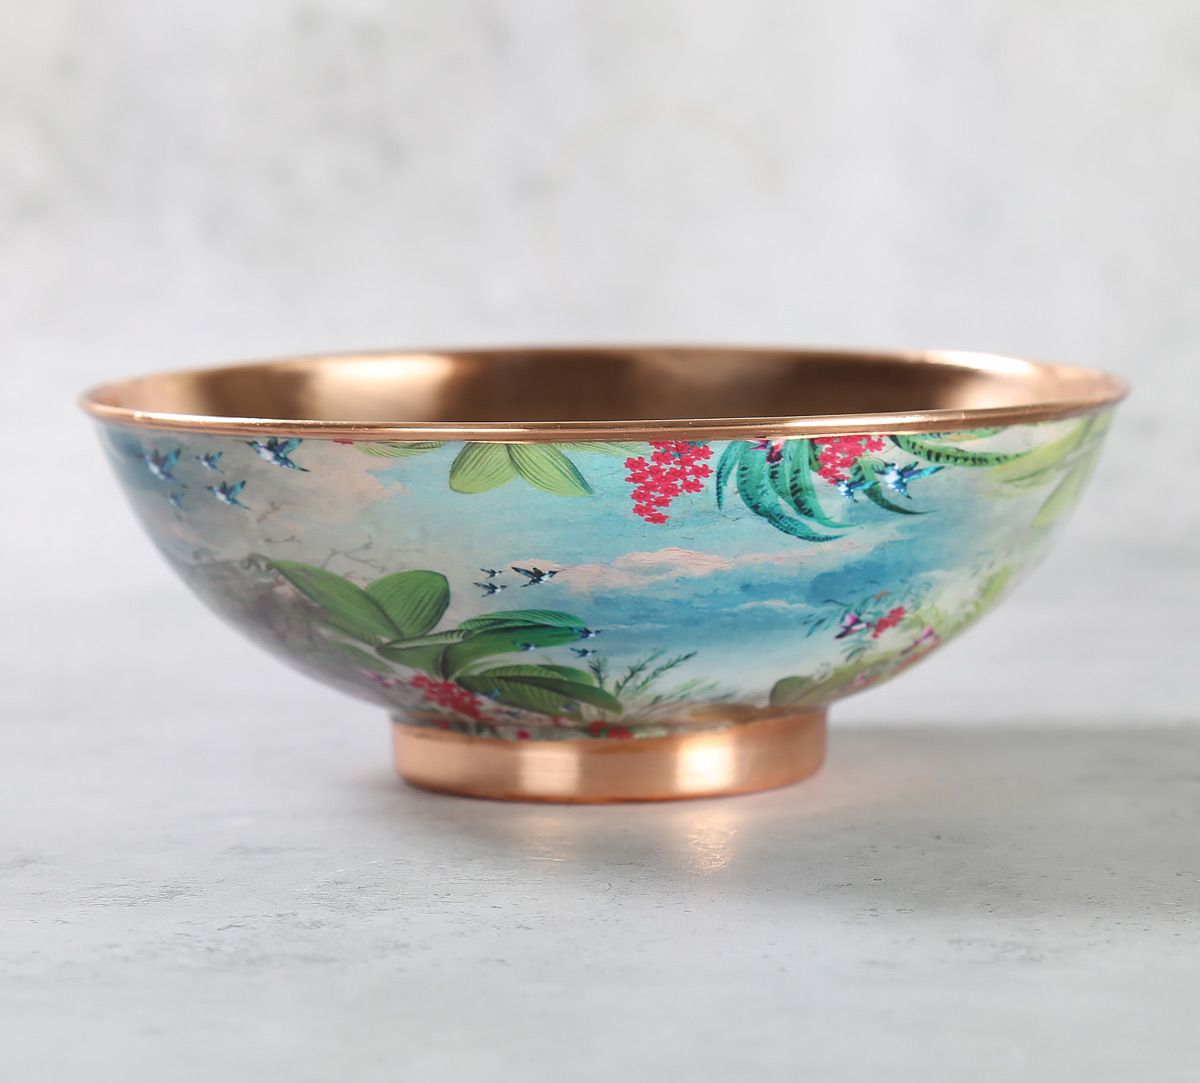 India Circus Tropical View Copper Bowl